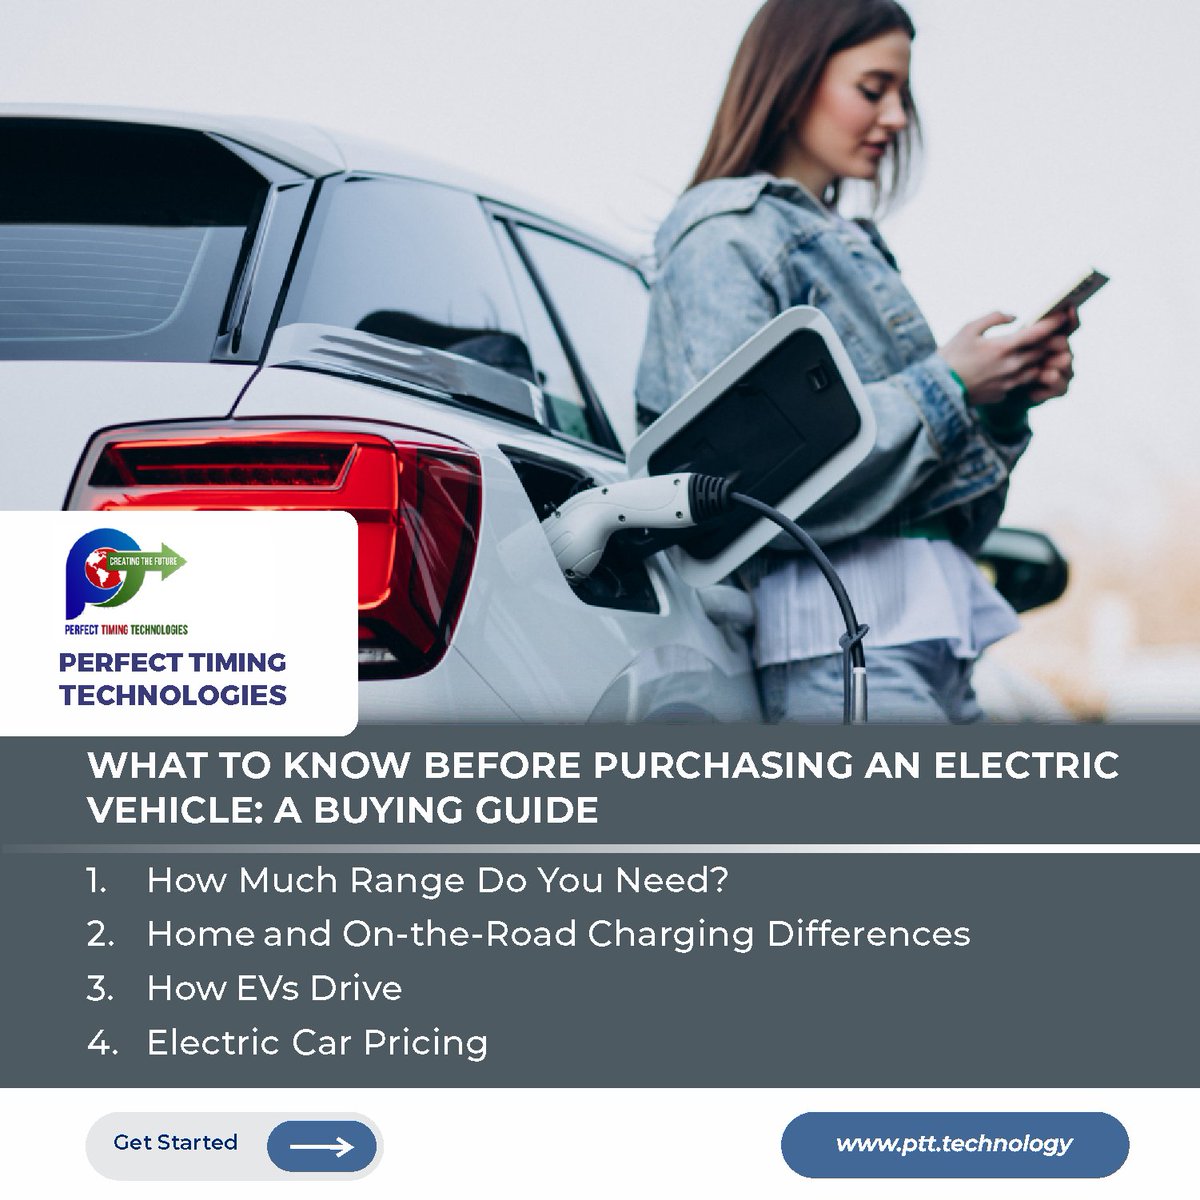 What to Know Before Purchasing an Electric Vehicle: A Buying Guide

Read Here: cars.com/articles/what-…

#PerfectTimingTechnology #PerfectTimingHolding  #ElectricVehicleGuide #EVBuyingTips #CarShoppingAdvice #GreenTransportation #SustainableDriving #ElectricCarEssentials